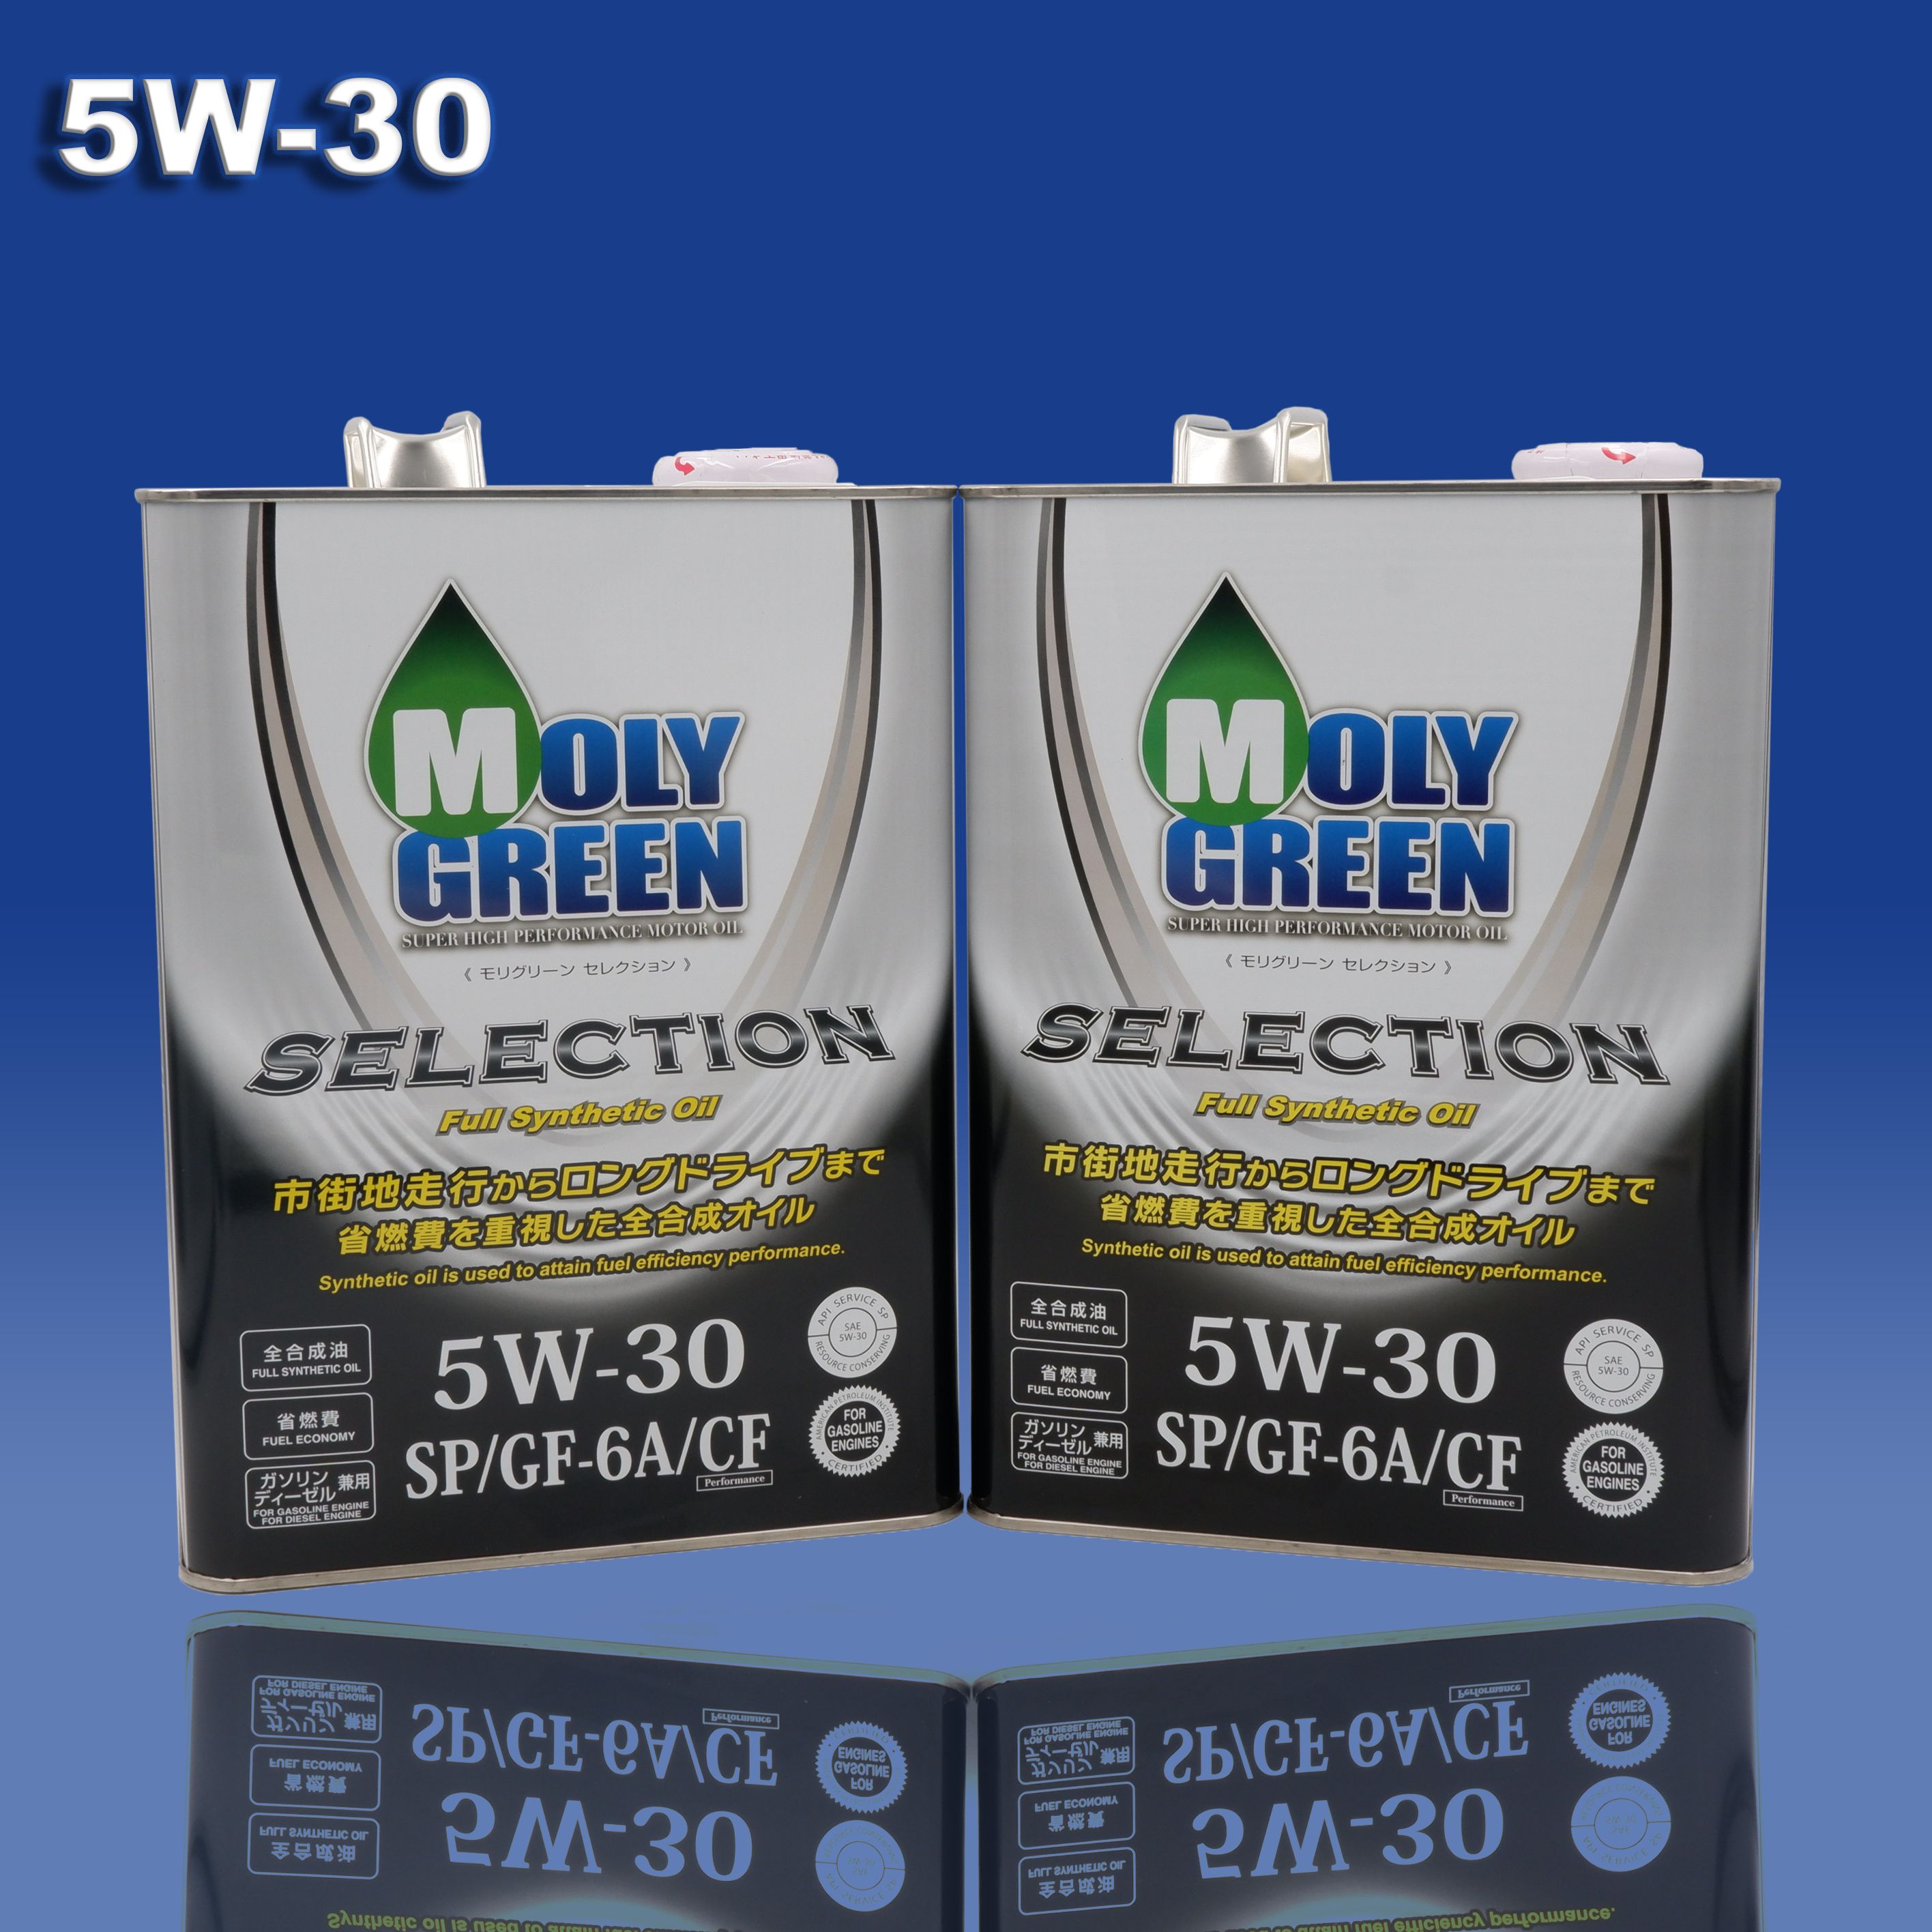 Moly моторное масло отзывы. MOLYGREEN масло моторное selection 5w-30 синтетическое. Moly Green selection 5w30 бочка 200. Moly Green ATF допуски. Moly Green Pro s.